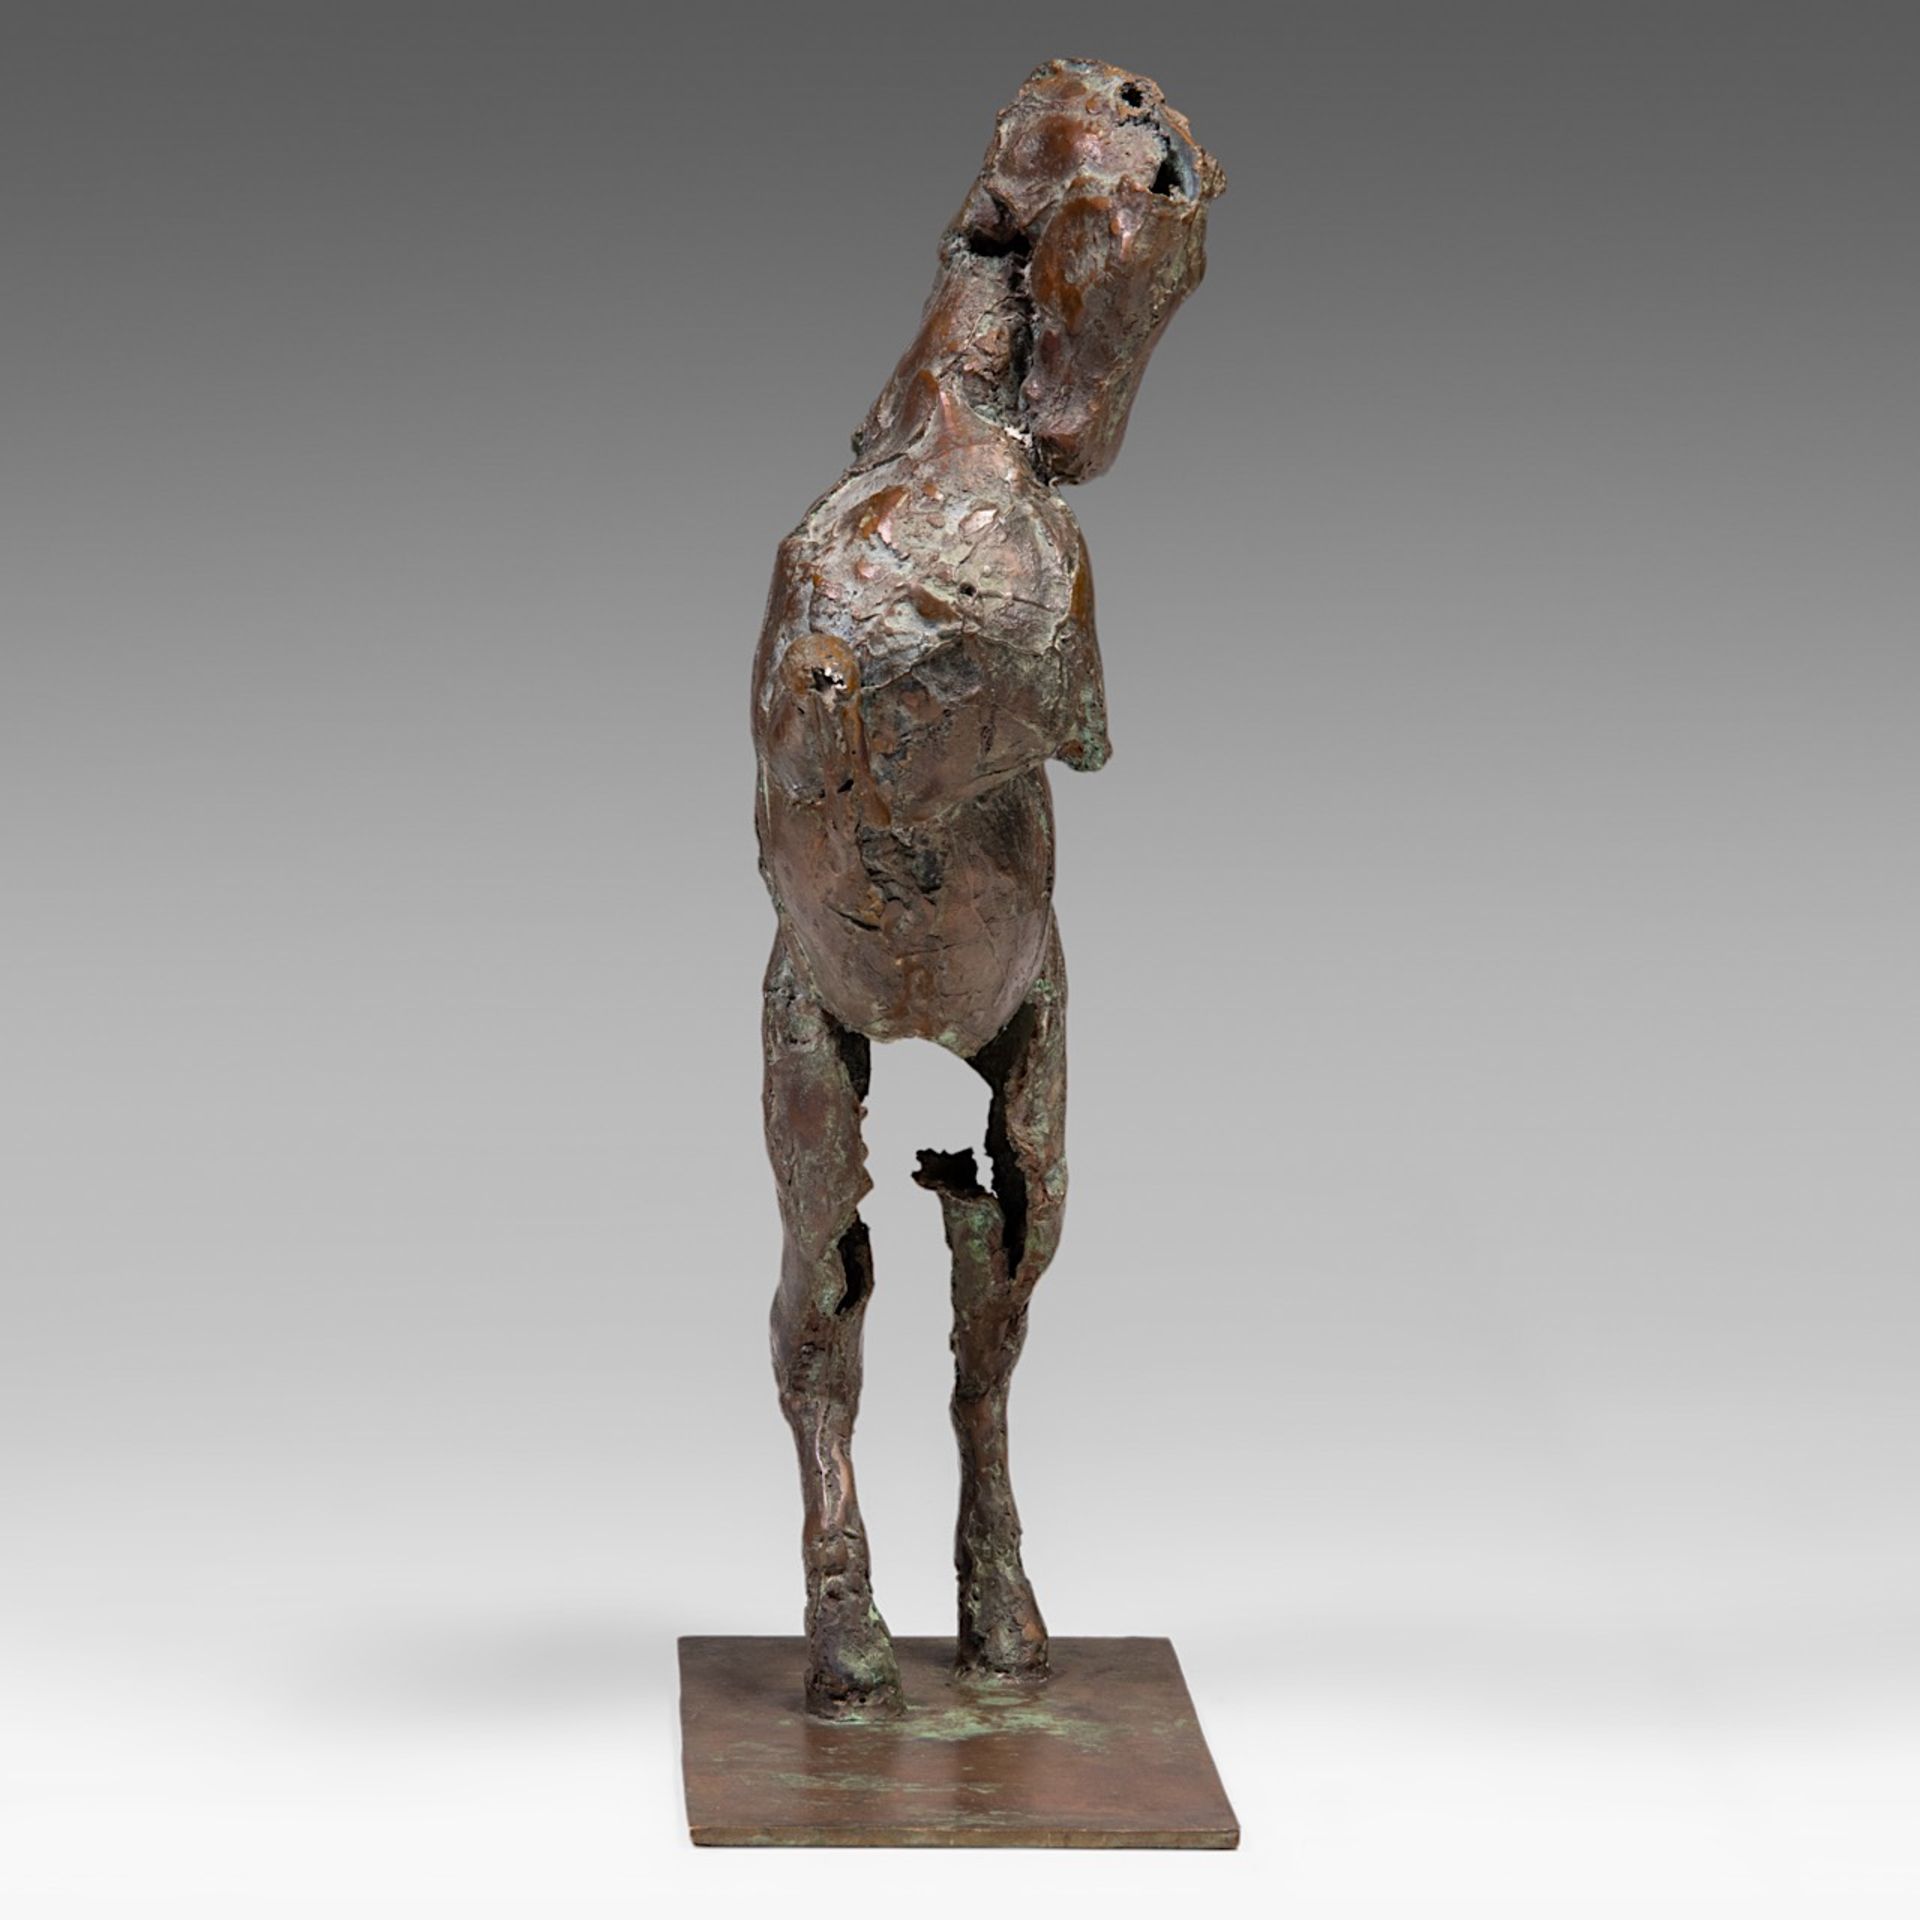 Jan Desmarets (1961), rearing horse, patinated bronze, 4/8 76 x 44.5 cm. (29.9 x 17.5 in.) - Image 6 of 7